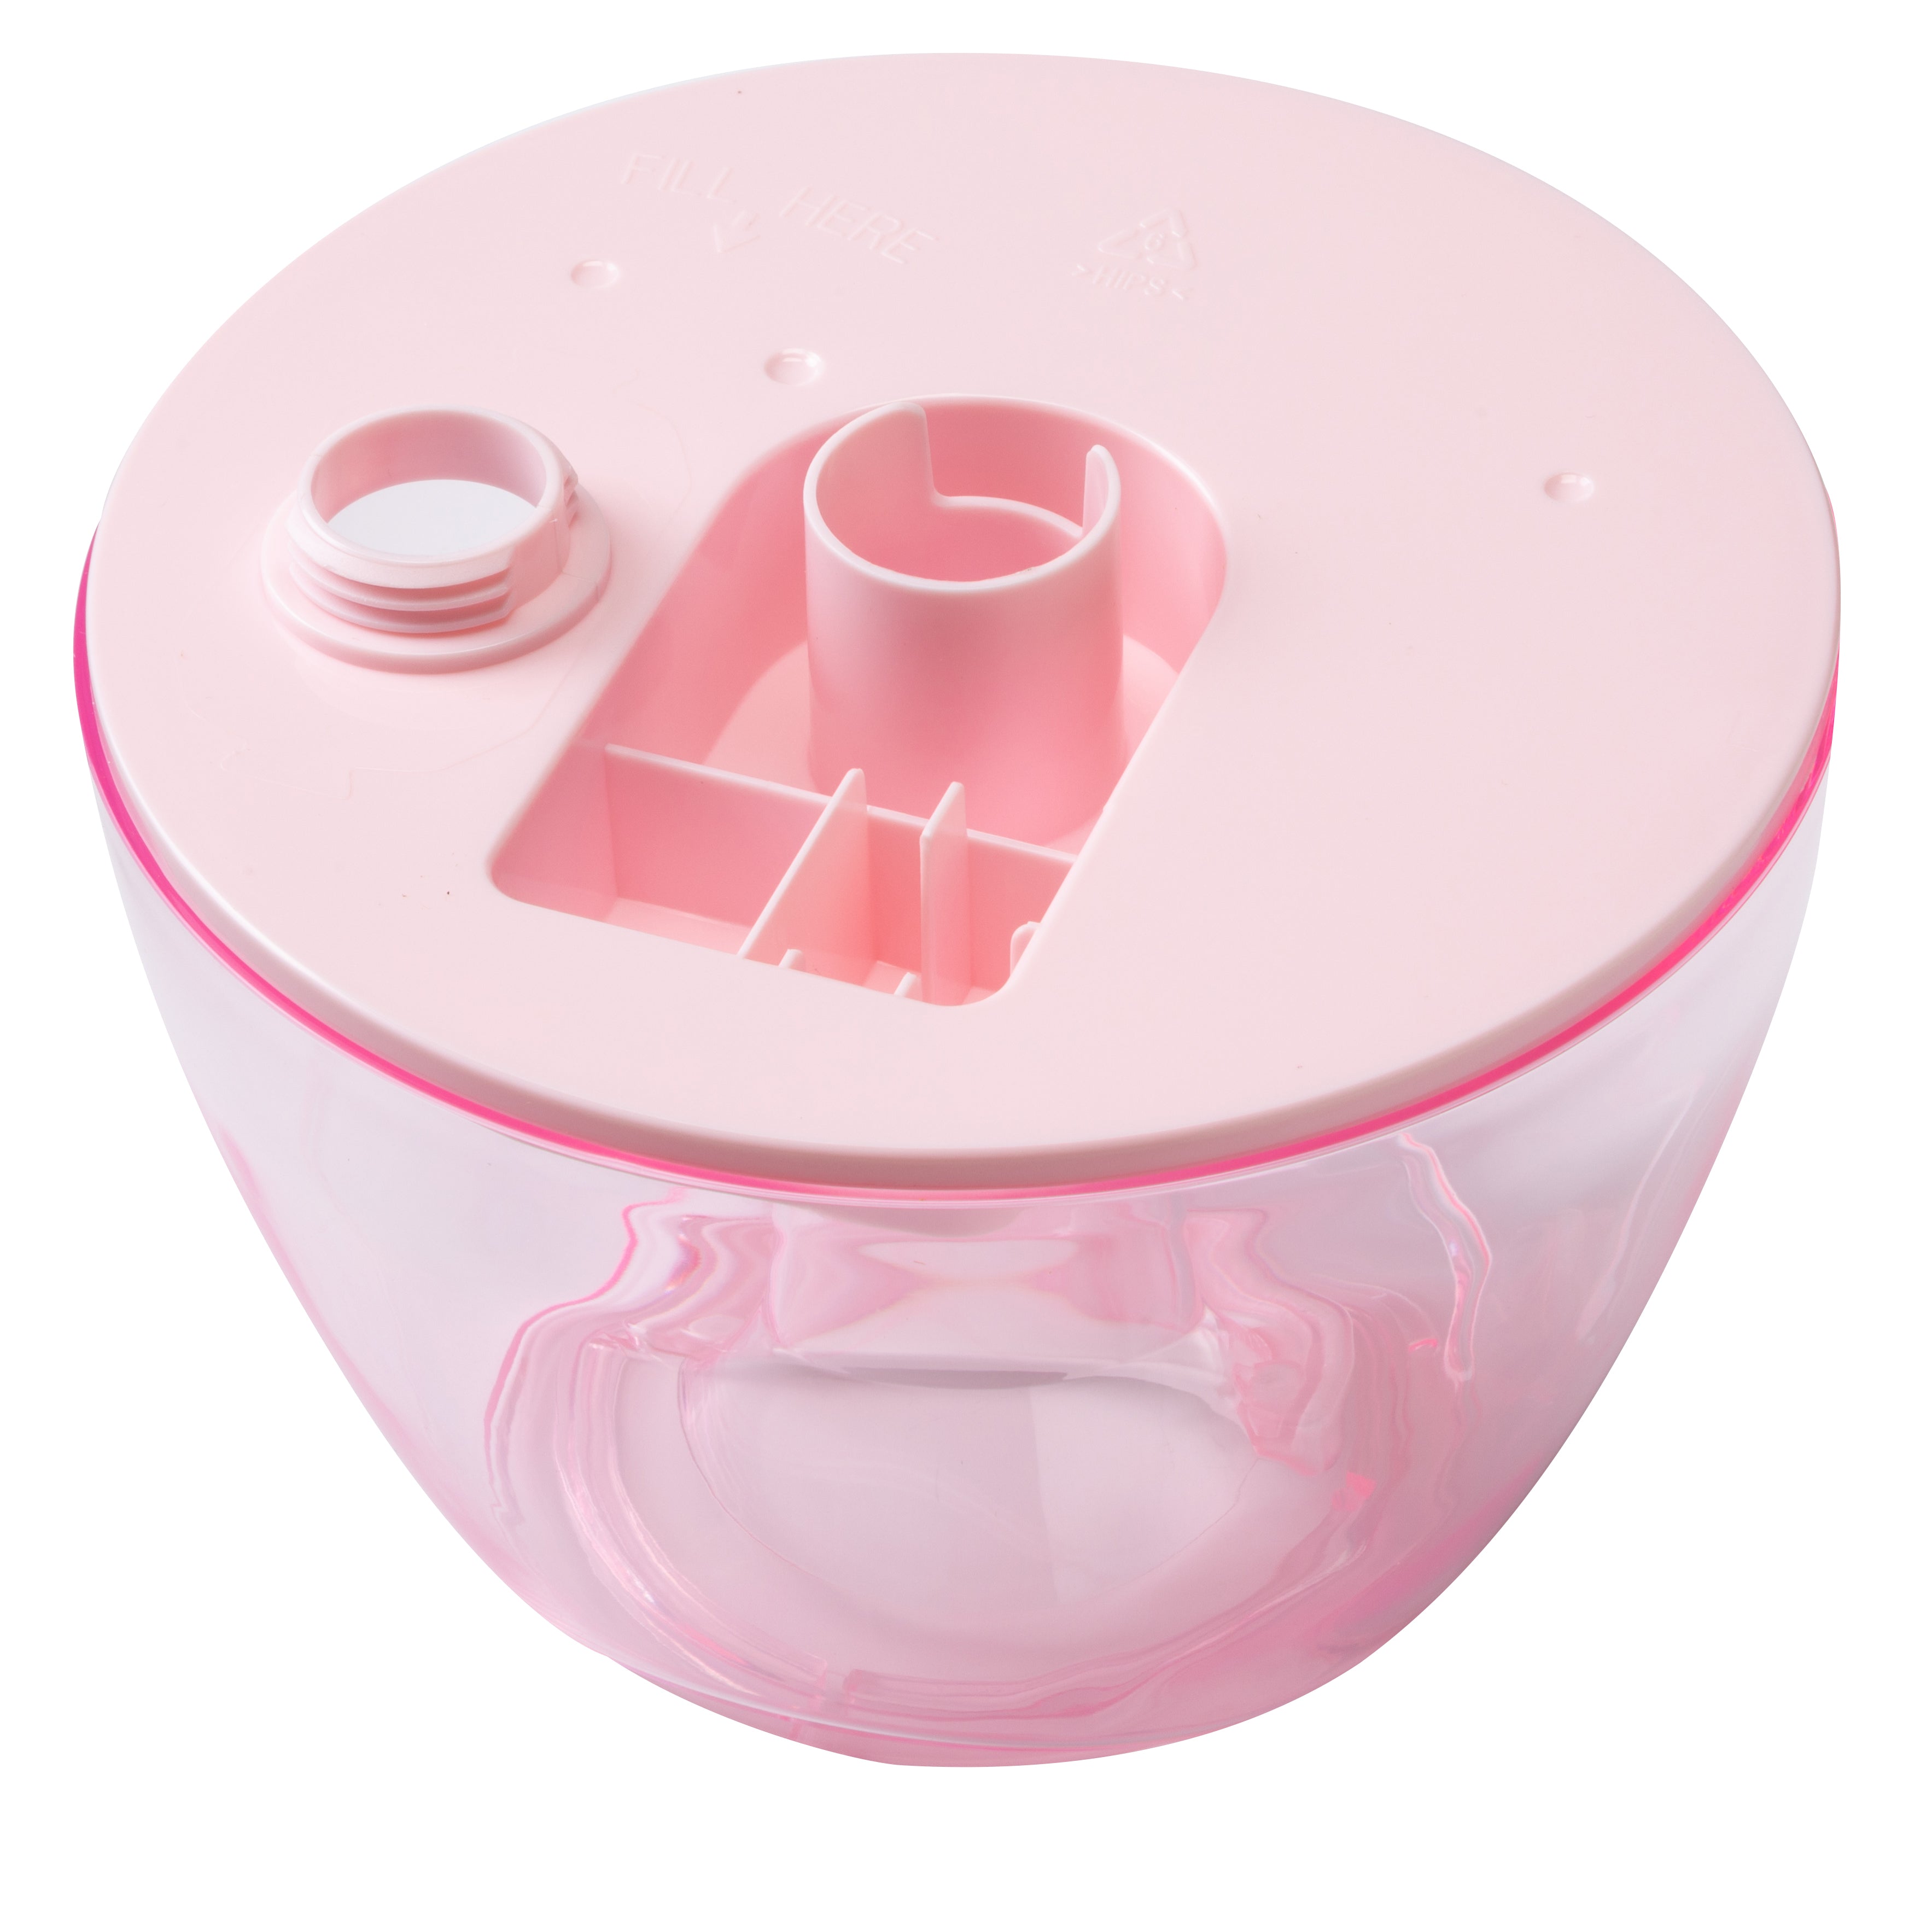 Filter Free Cool Mist Humidifier Replacement Tank - Pink